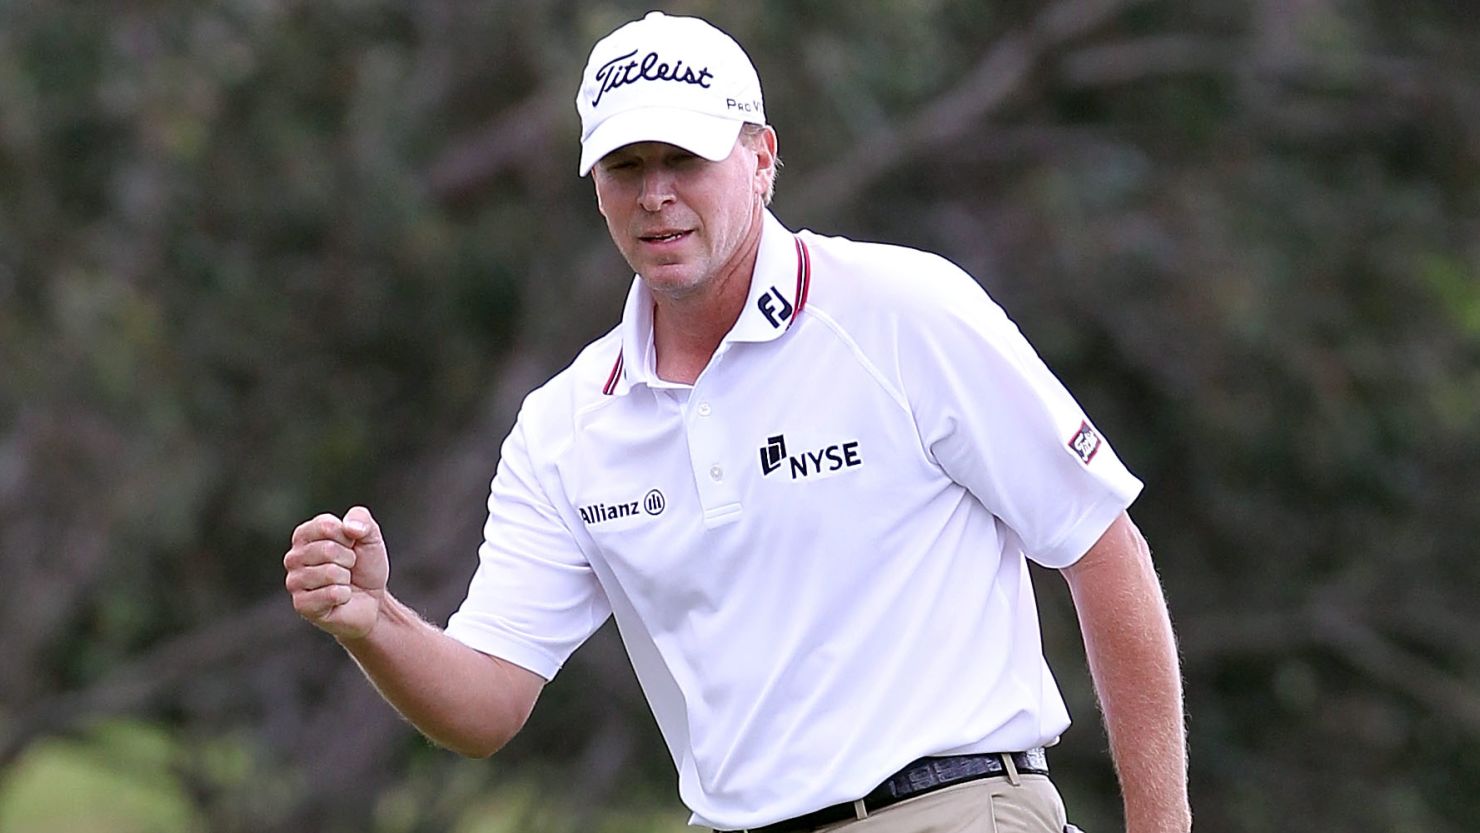 World number five Steve Stricker has now won 12 times on the PGA Tour since turning pro in 1990.